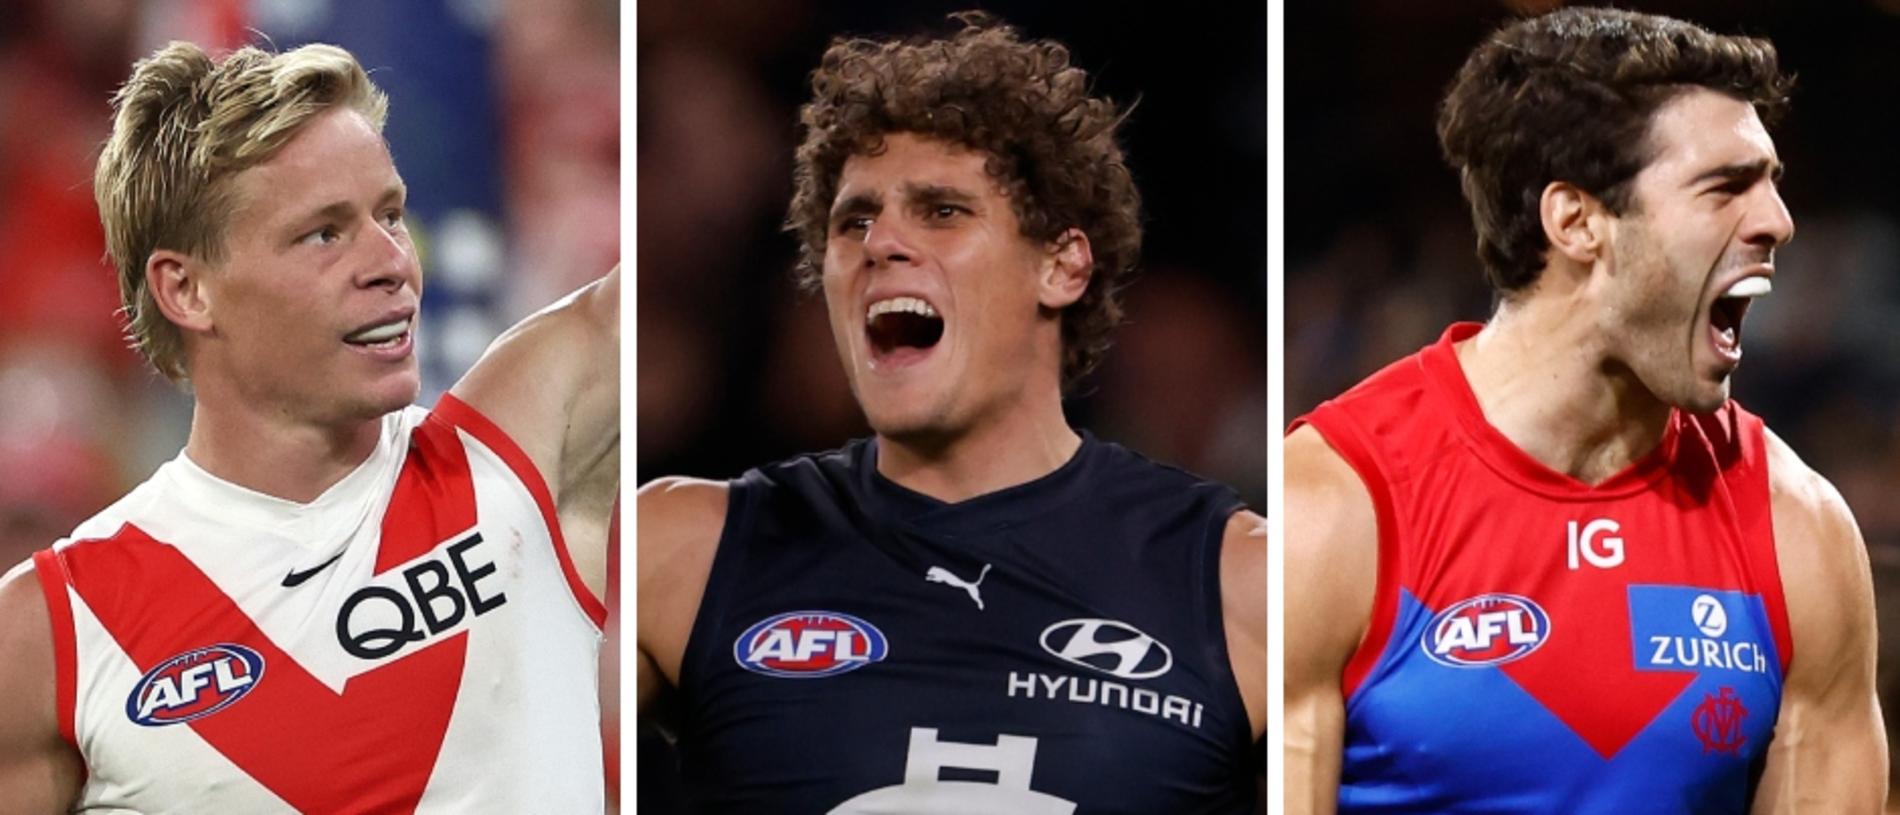 Foxfooty.com.au has identified the seven key contenders in this year’s race – plus an emerging wildcard – and named their reason for hope, question mark and previewed their upcoming fixture.